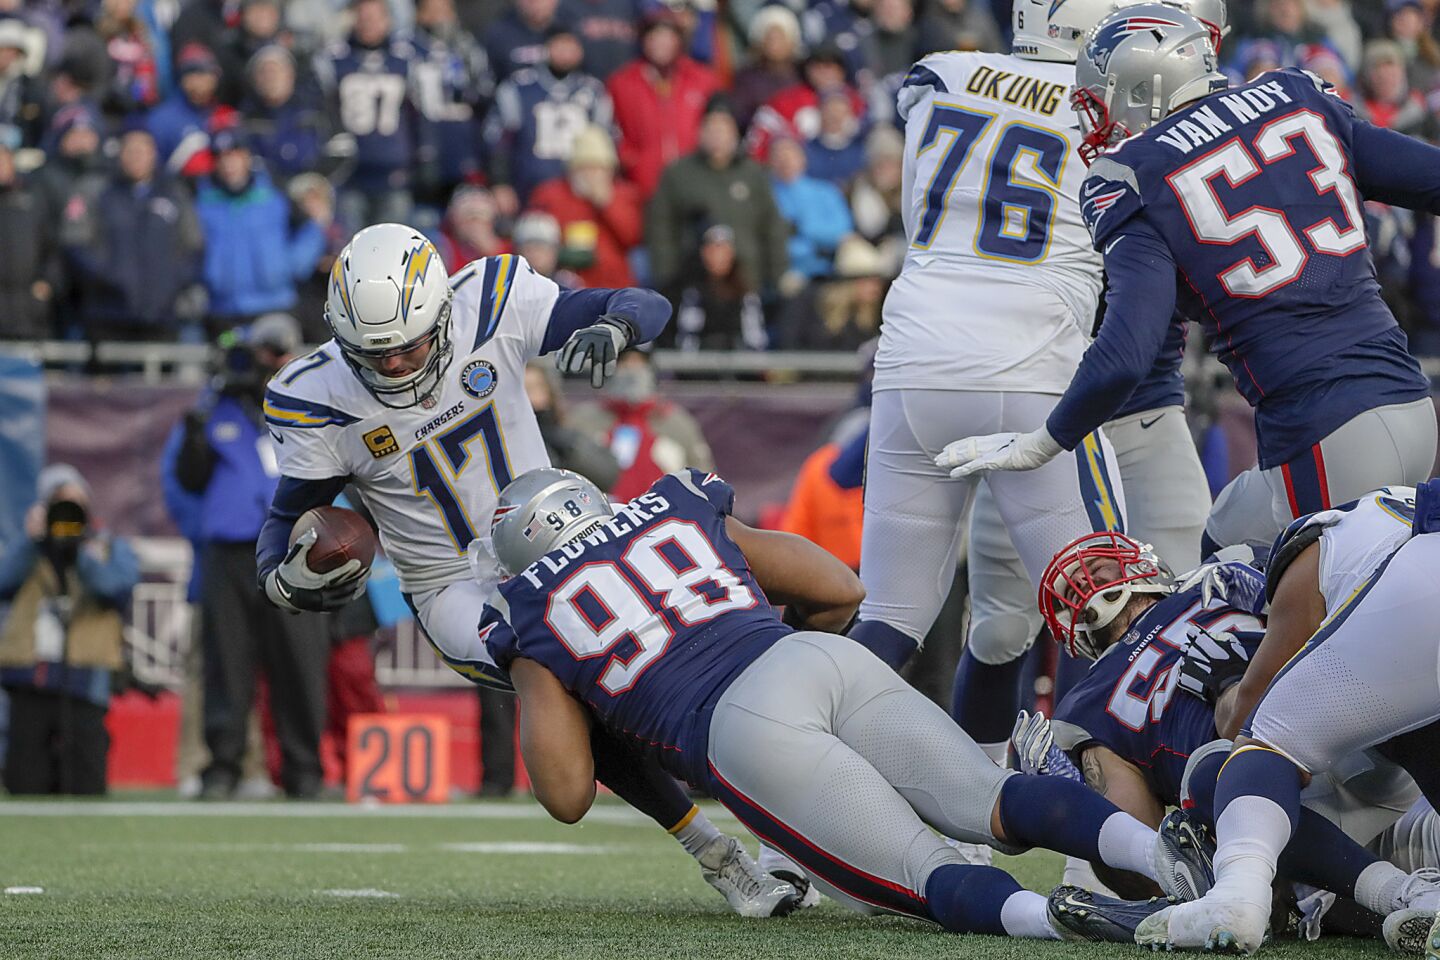 Chargers quarterback Philip Rivers is sacked by New England Patriots defensive lineman Trey Flowers late in the second quarter in the NFL AFC Divisional Playoff at Gillette Stadium on Sunday.